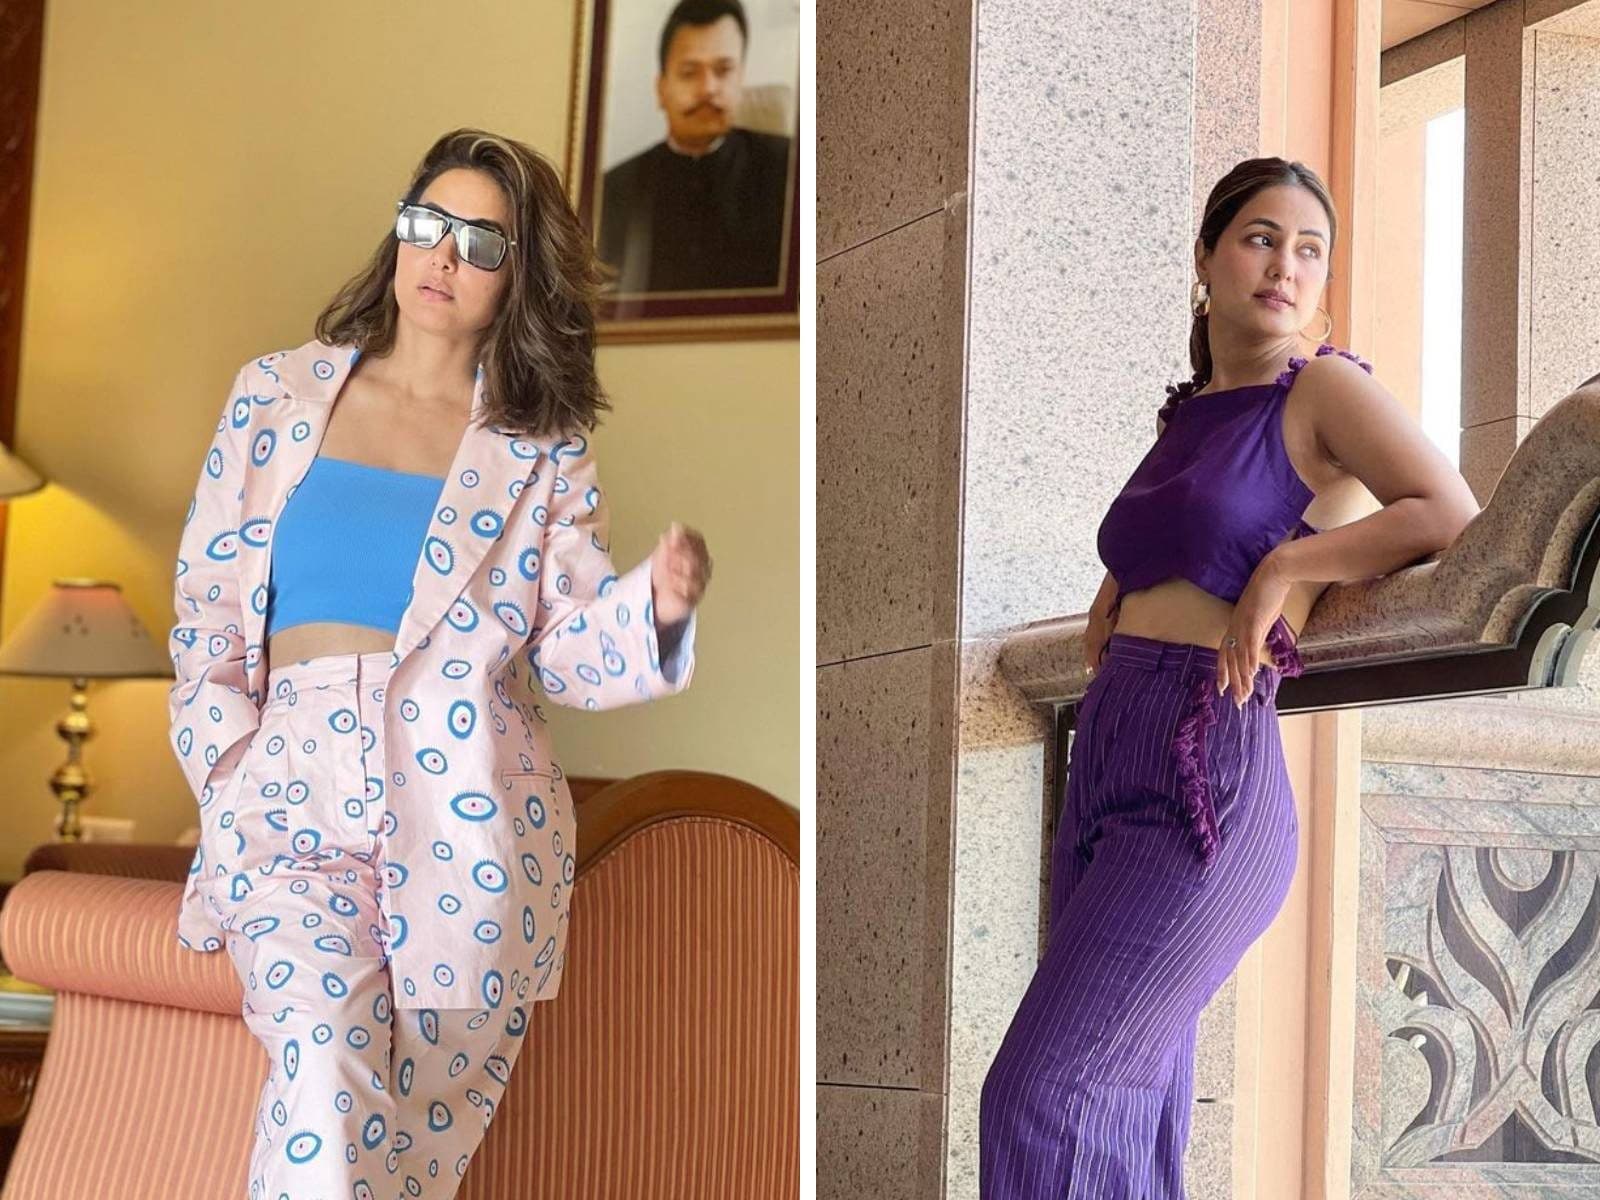 Fashion News, Hina Khan's Printed Co-ord Set is Just the Outfit We Needed  for Our Summer Wardrobe